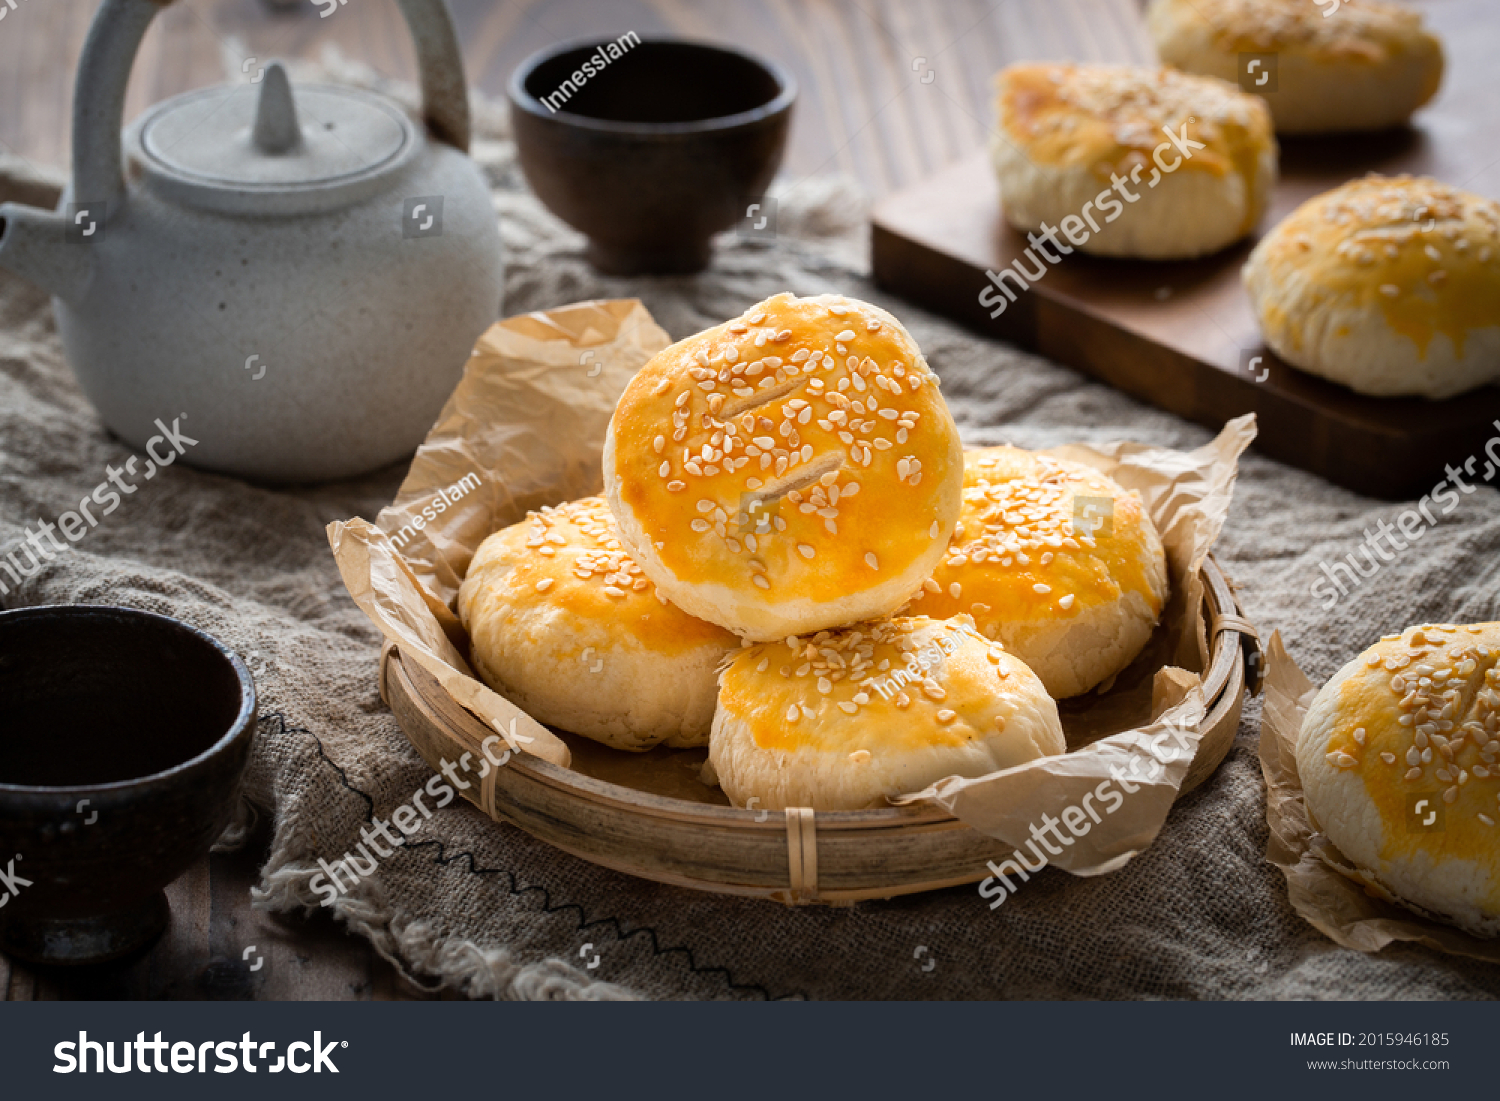 Traditional Chinese Cantonese pastry Sweetheart Cake or Lo Po Beng placed on a bamboo plate on a wooden table. there are also a tea pot and two tea cups as well as some more cakes. #2015946185